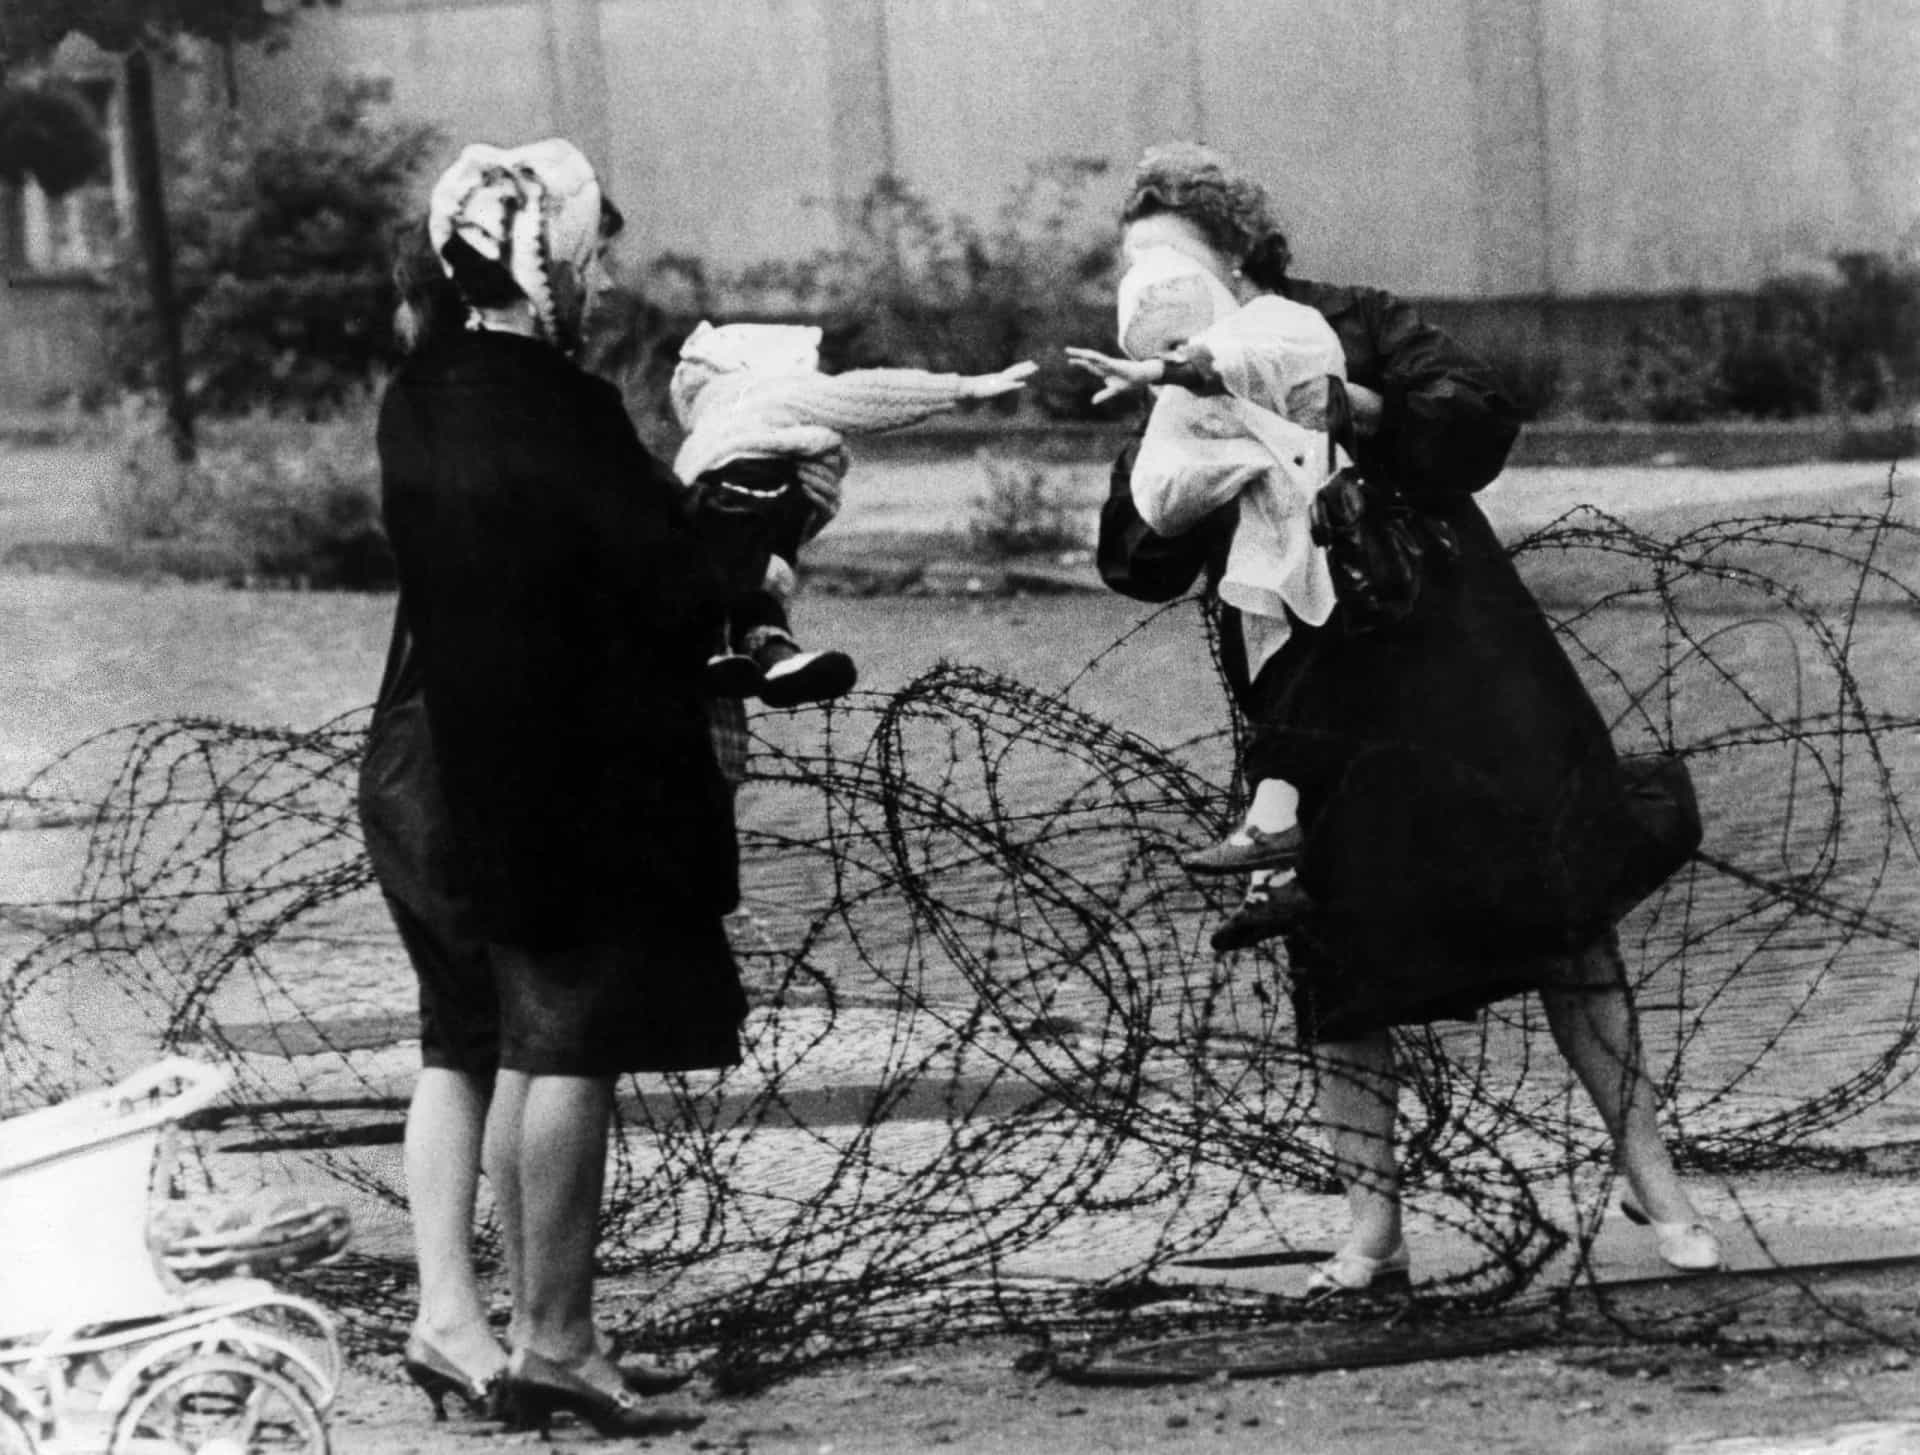 <p>This poignant image captures the heartache and bewilderment felt by many on both sides of the wall as they tried to communicate with family and friends during the early days of the divide, when the barricade was not much more than tangled barbed wire fence.</p><p>You may also like: <a href="https://www.starsinsider.com/n/280960?utm_source=msn.com&utm_medium=display&utm_campaign=referral_description&utm_content=509600en-us">Celebrities who were found dead in hotels</a></p>